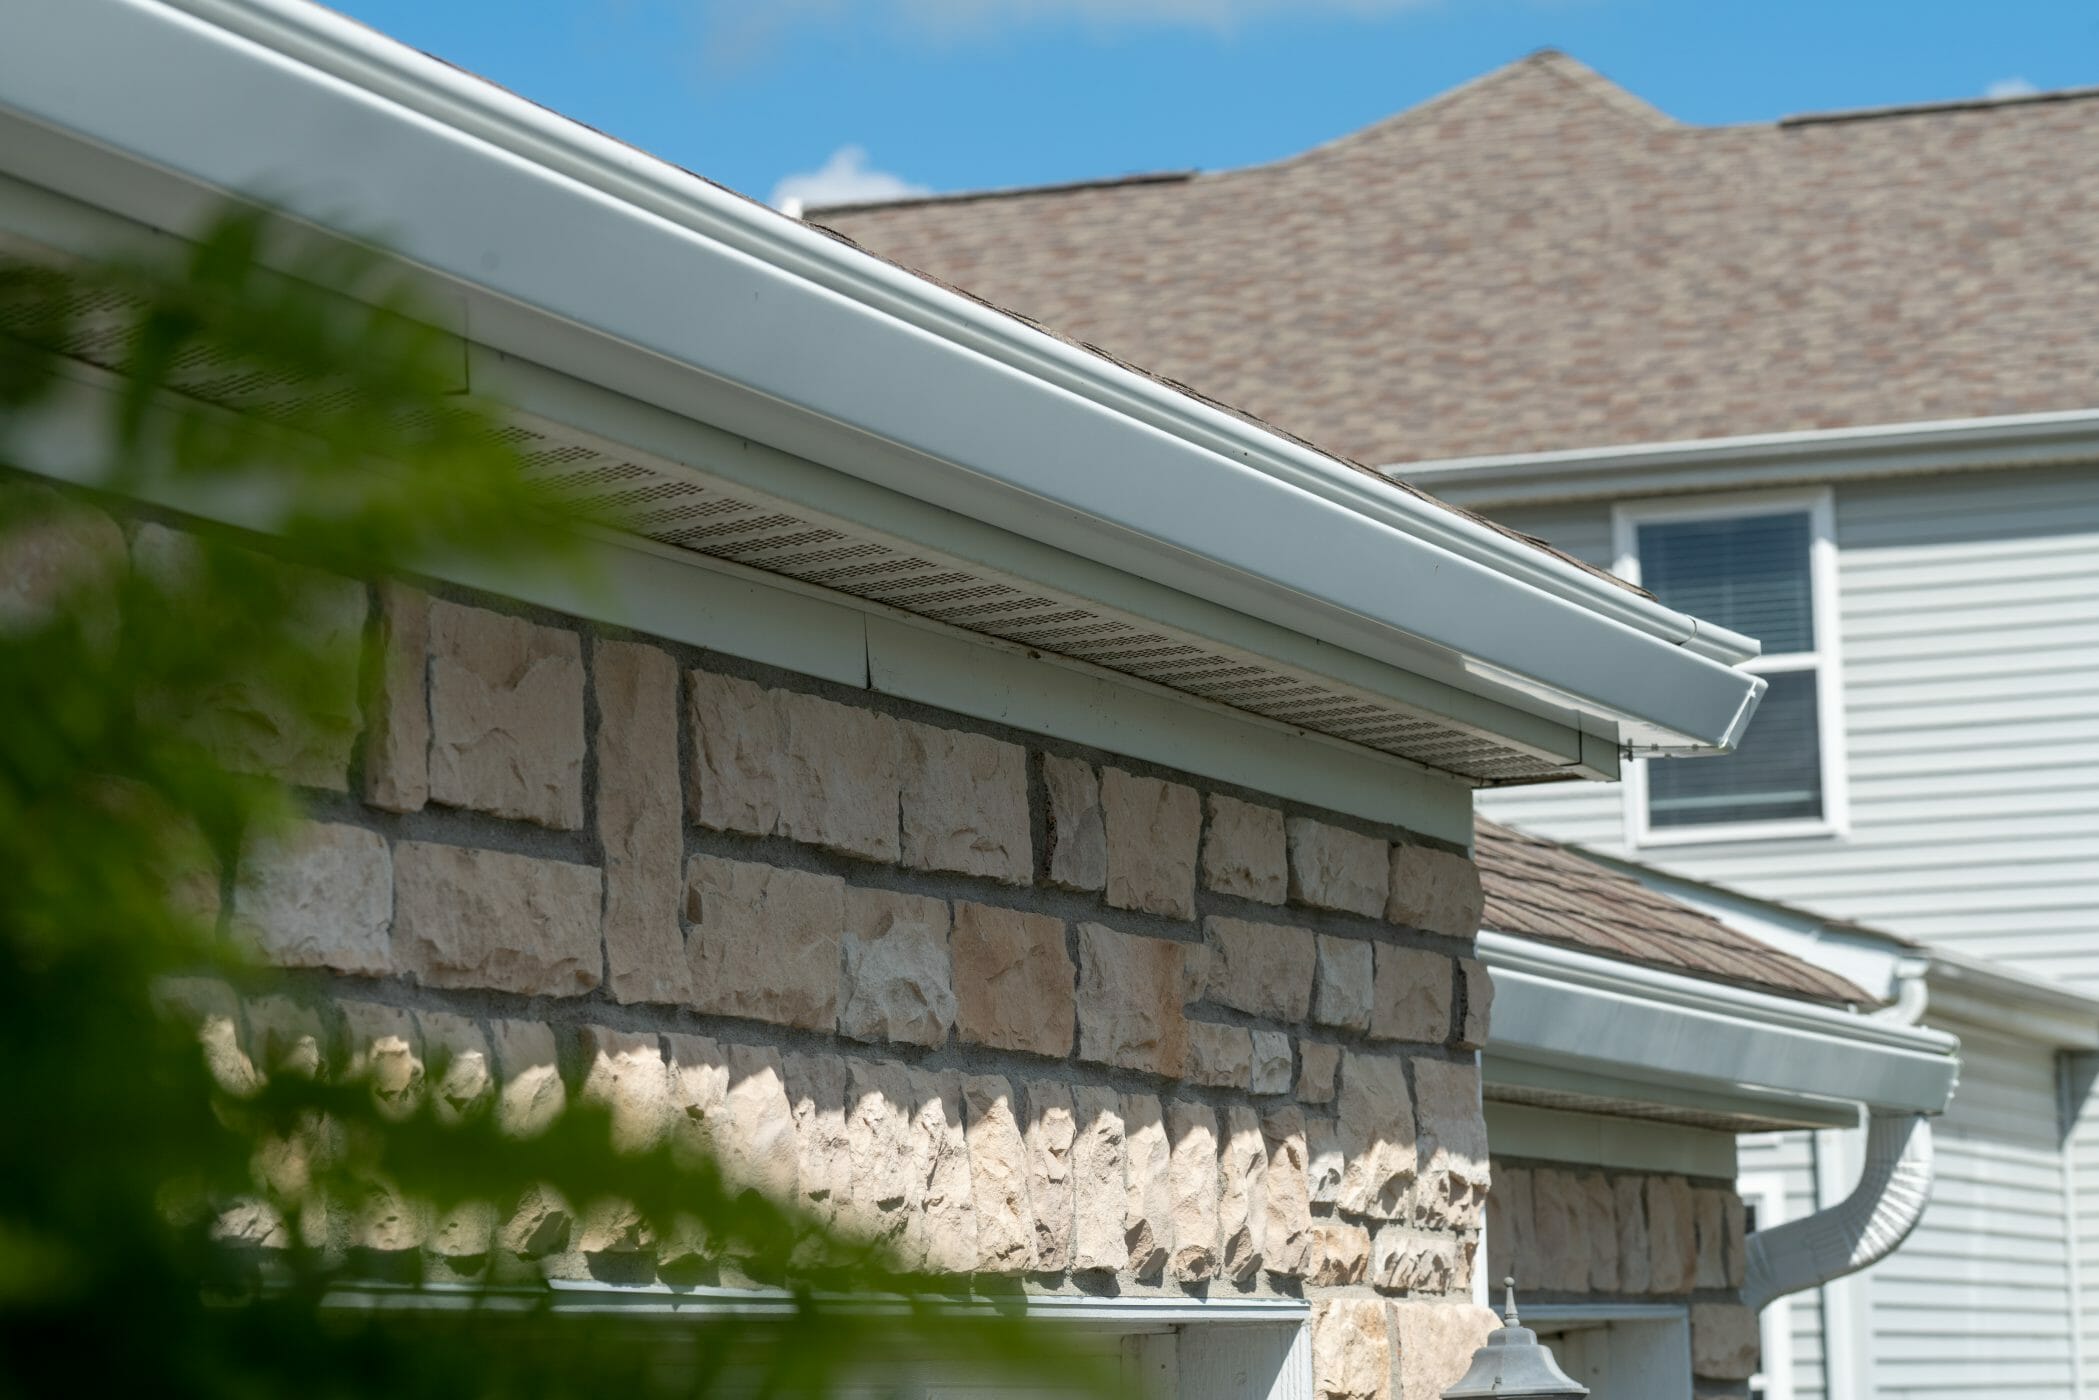 Gutter Guards To Protect Your Home’s Exterior